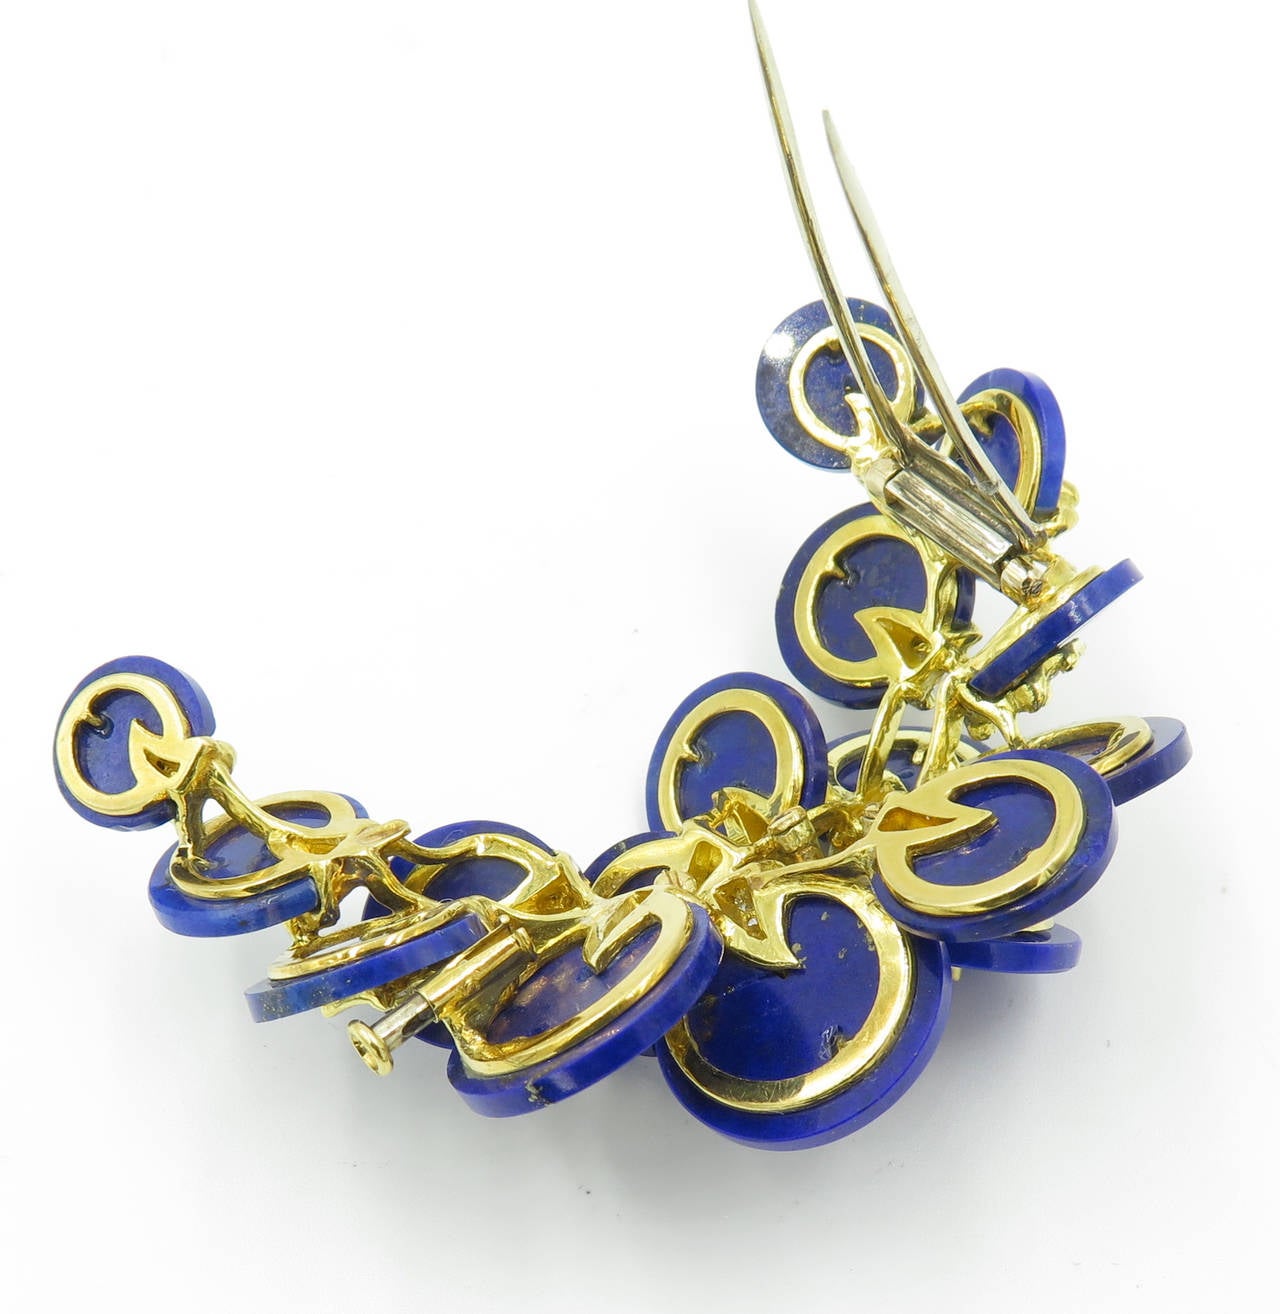 An 18 karat yellow gold, lapis lazuli and diamond brooch, Circa 1970s.  The crescent shaped brooch is set with 16 graduated lapis lazuli discs, each mounted with a pave diamond yellow gold section.  The brooch contains a total of 88 single cut and